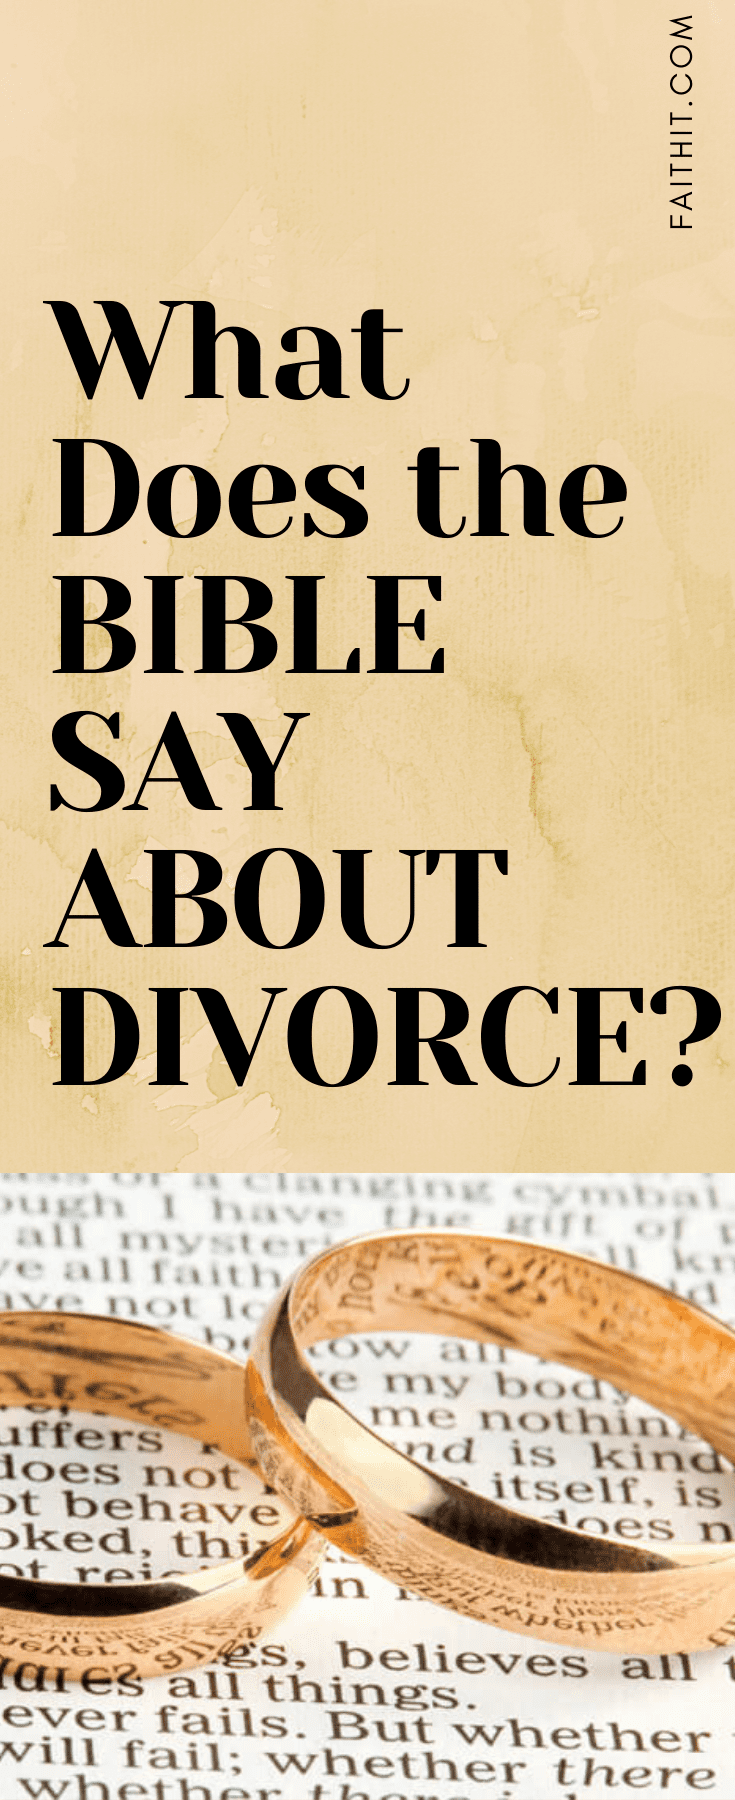 What Does the Bible Say About Divorce?